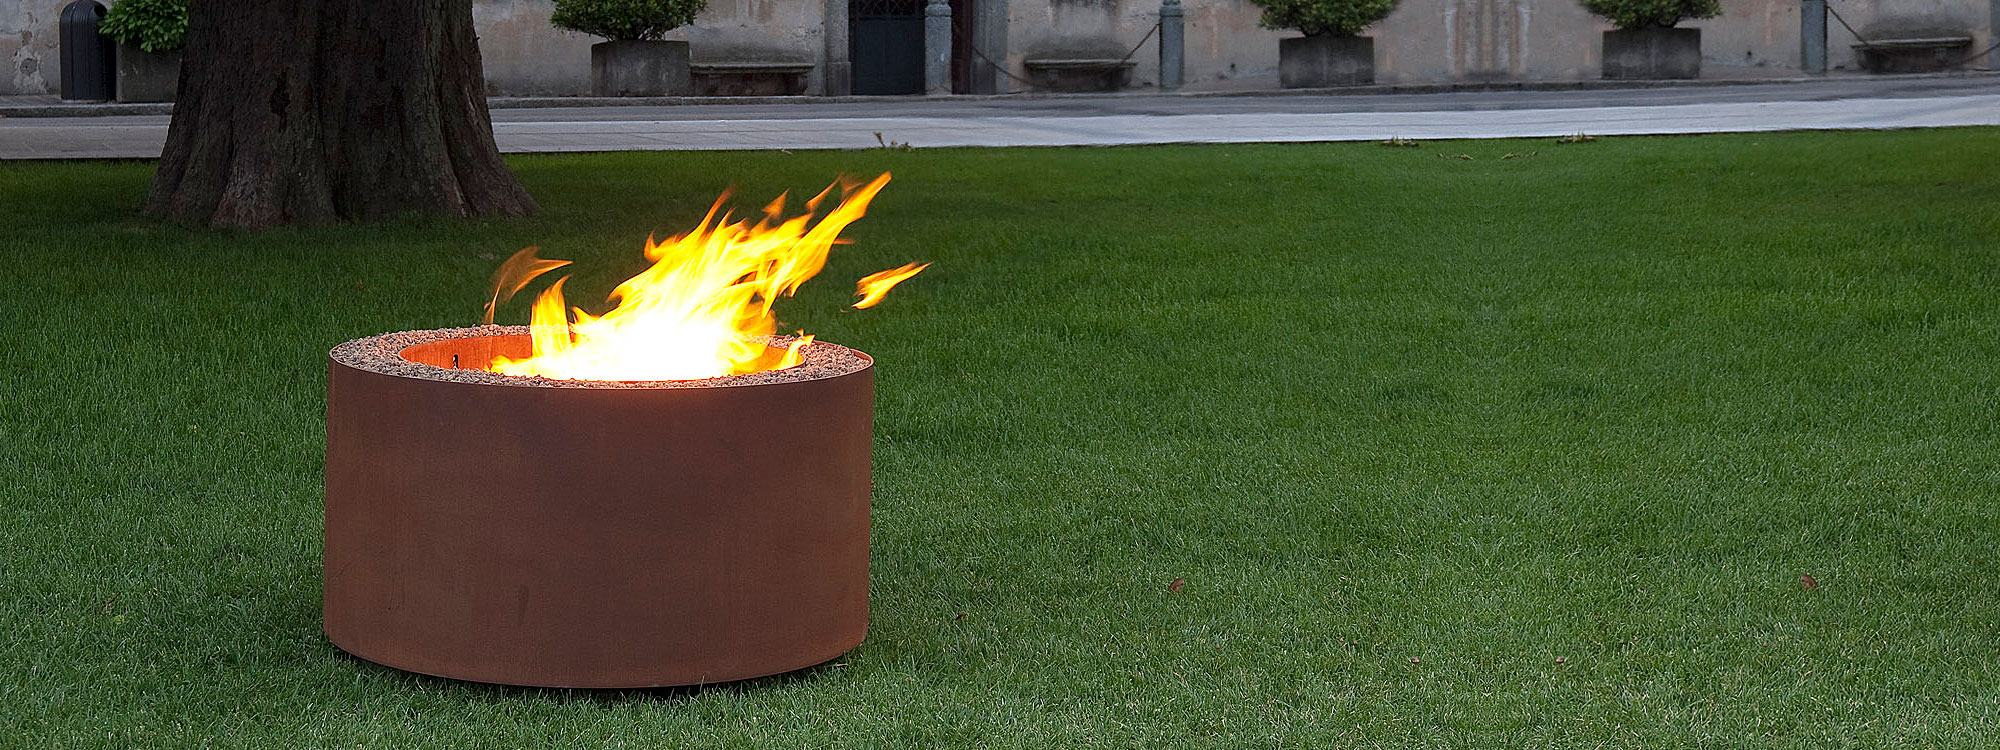 Image of flaming Mangiafuoco fire pit in vintage brown finish by AK47 Design